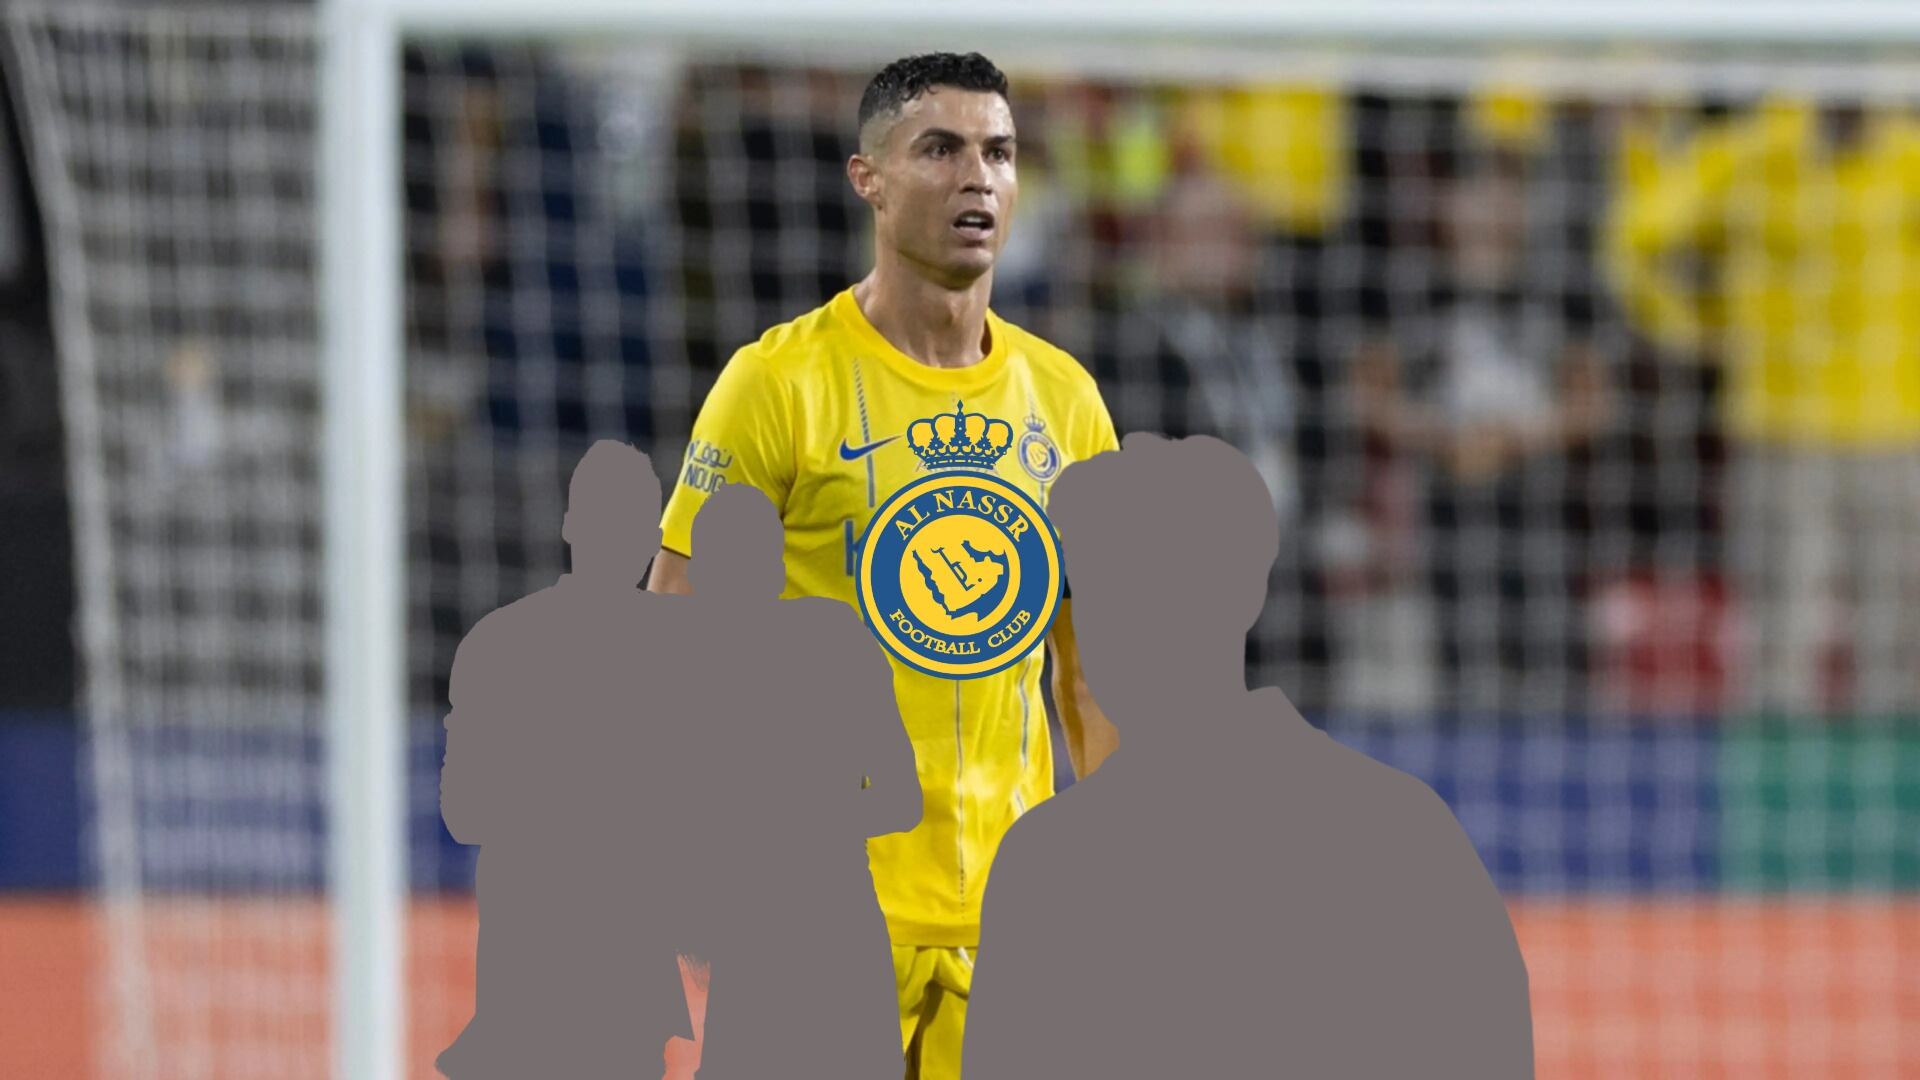 Cristiano has lots of options to exit but Al Nassr wants CR7 to stay, the players they would sign to persuade Ronaldo 